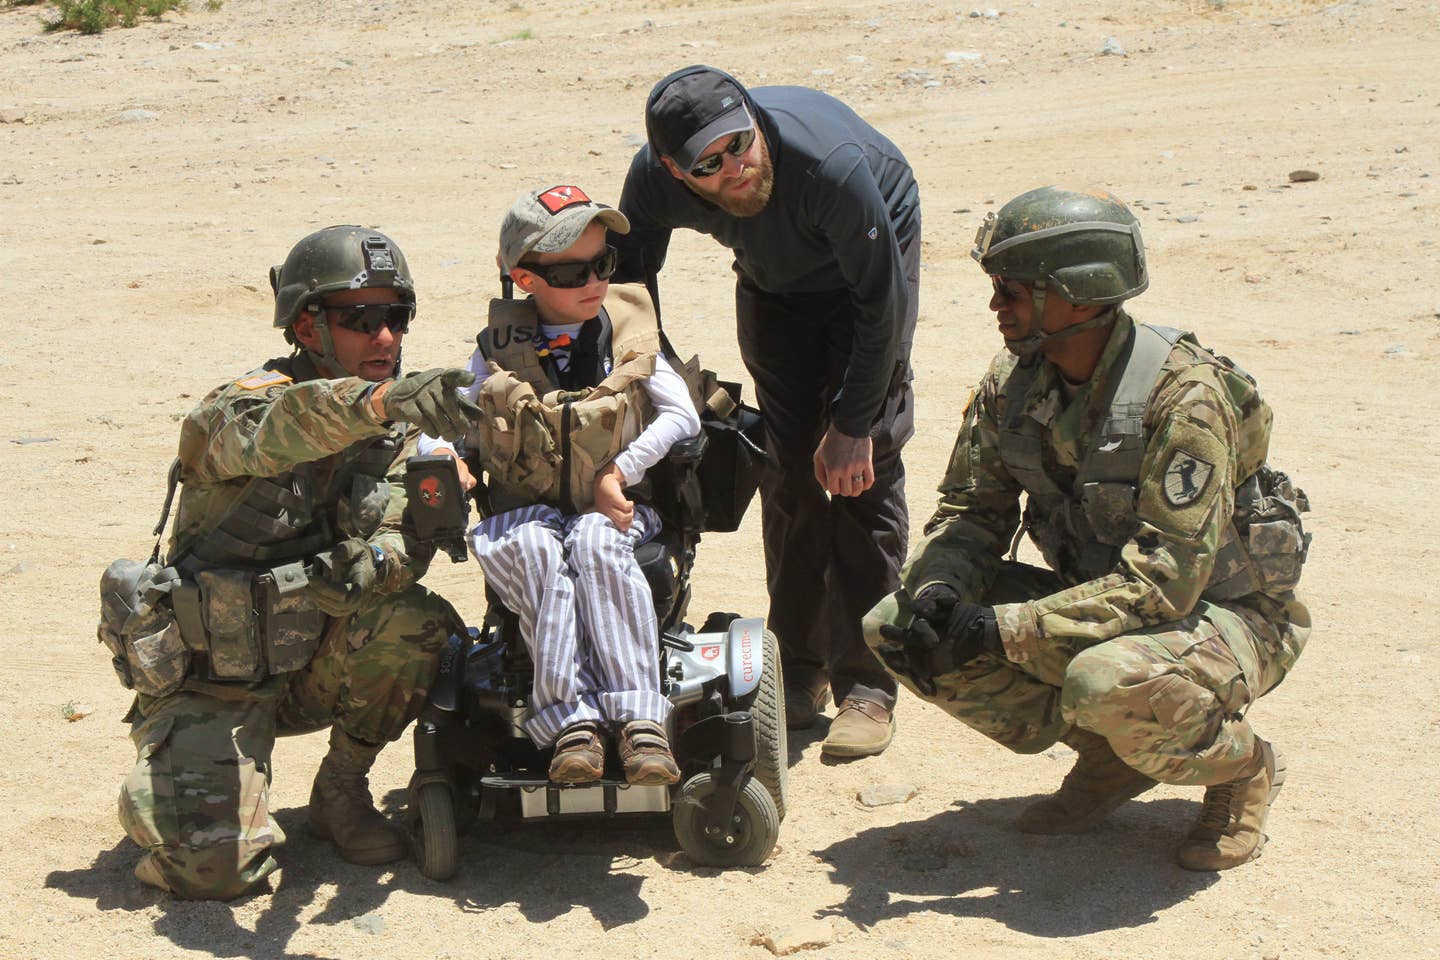 The 11th Armored Cavalry Regiment Troopers explain building clearance drills to Ethan Larimer, 11th ACR Honorary Blackhorse Trooper, and Daniel Larimer, Ethan's father and former Blackhorse Trooper.